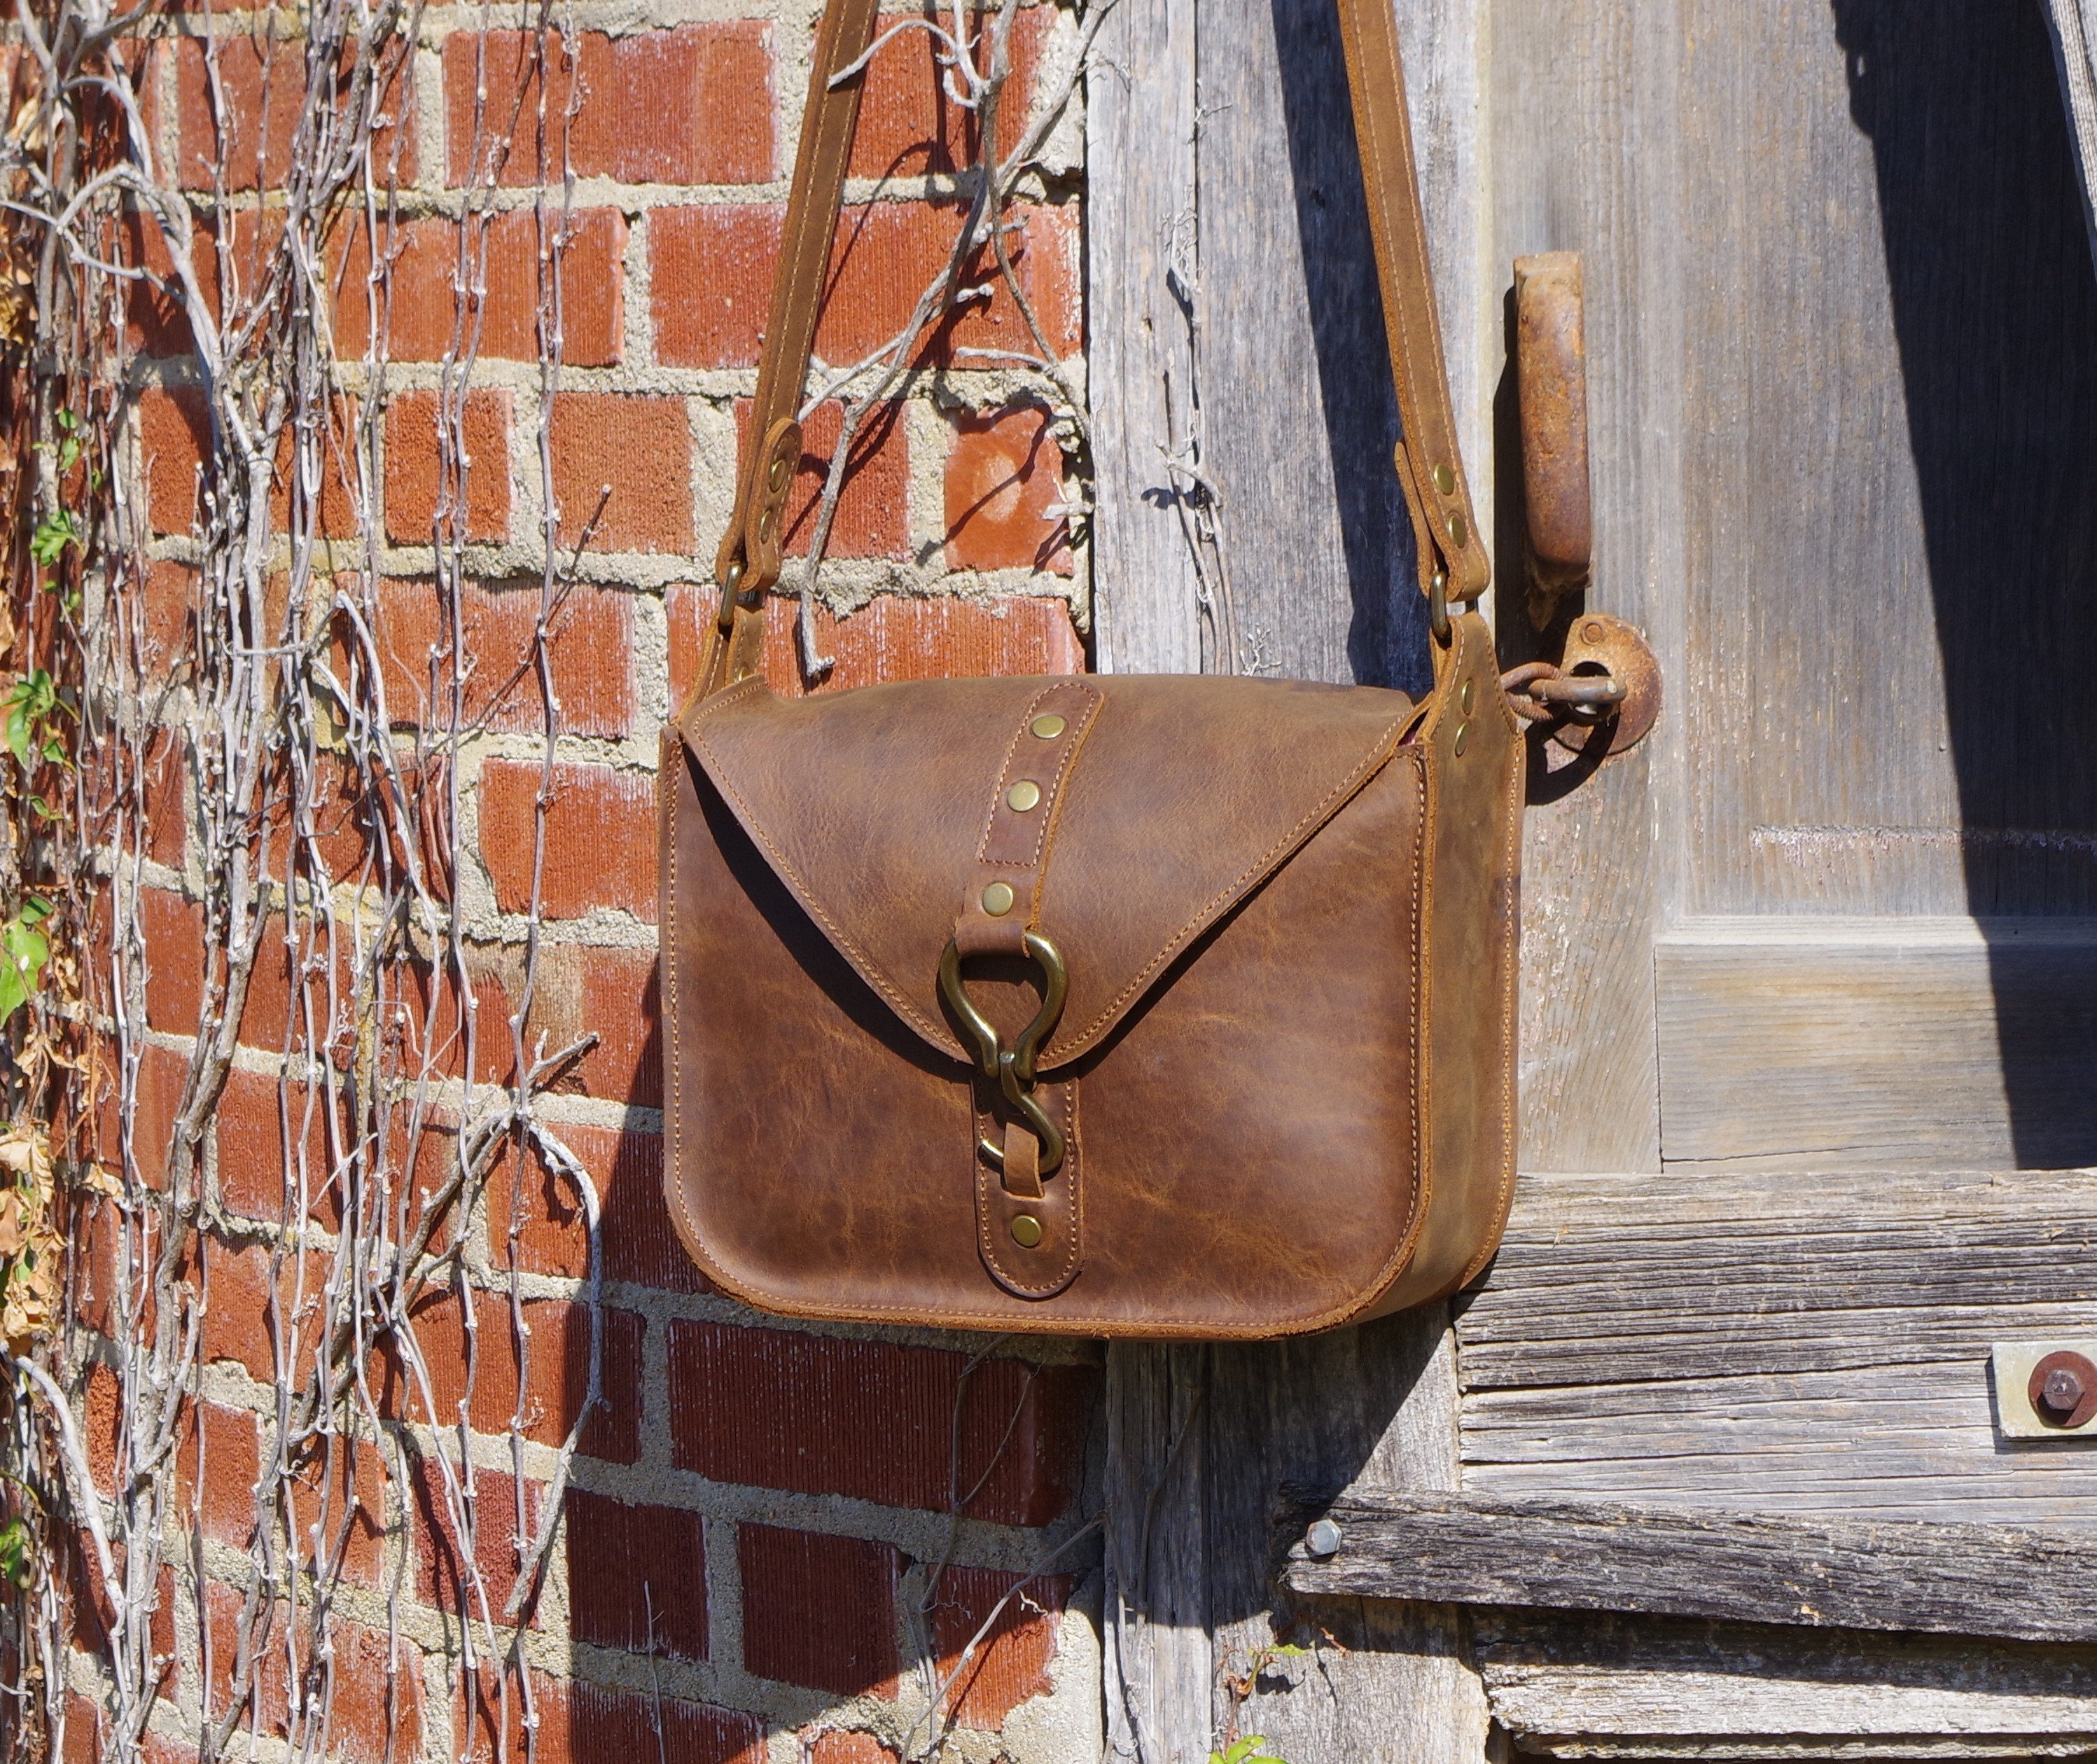 Leather Crossbody Bag. Beautiful Rustic Bag With Natural - Etsy